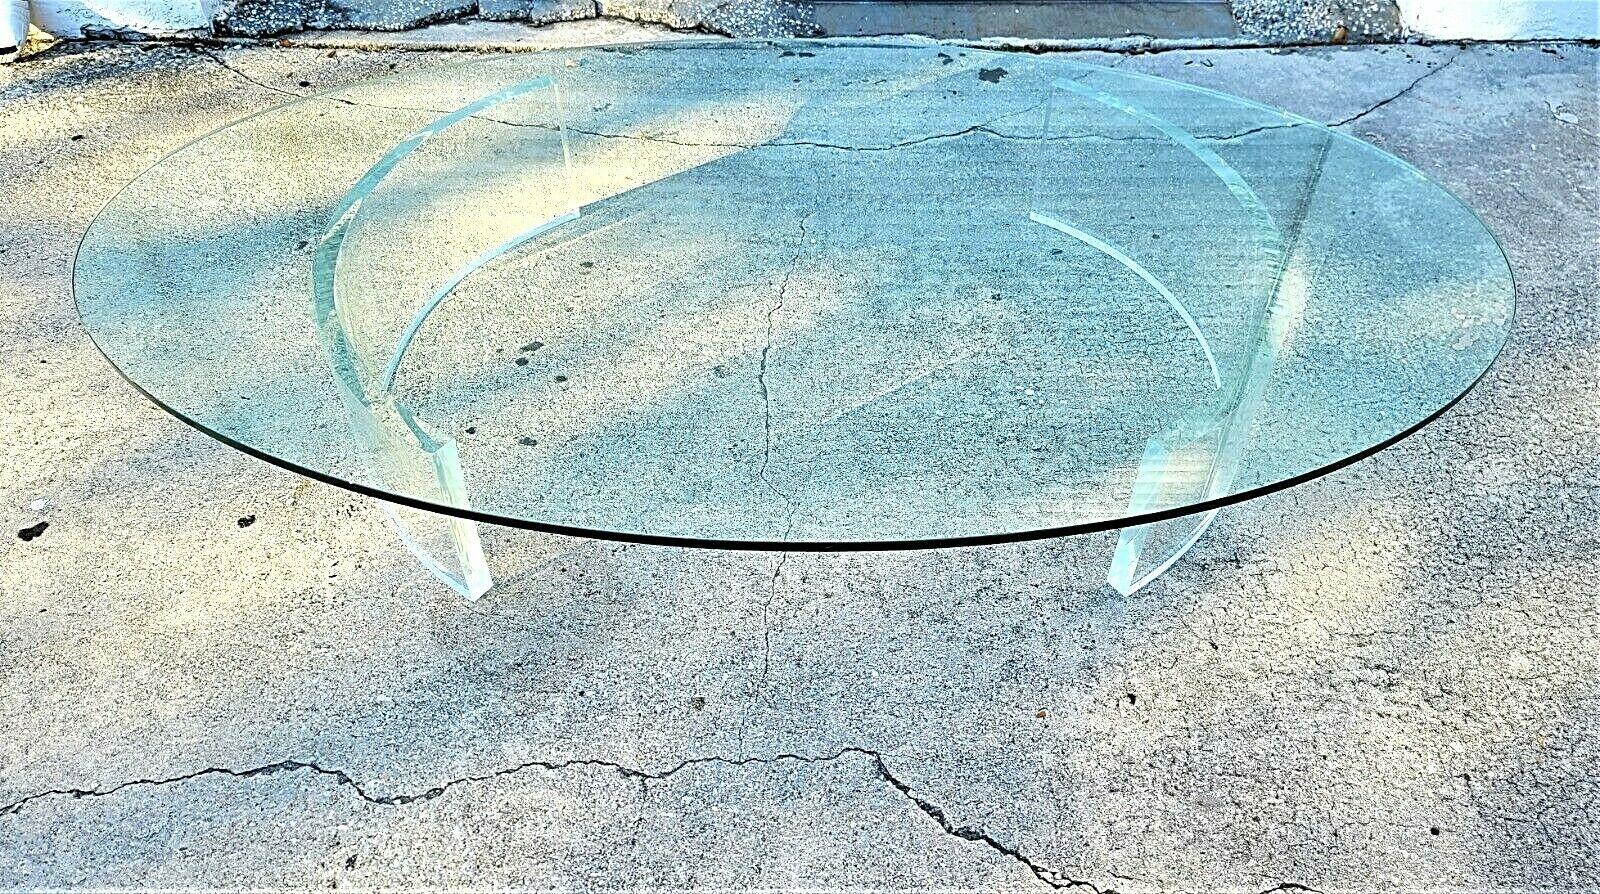 Offering one of our recent Palm Beach Estate fine furniture acquisitions of a
Mid-Century Modern dual curved Lucite pedestals & glass oval coffee cocktail table.

Approximate Measurements in Inches
12.75